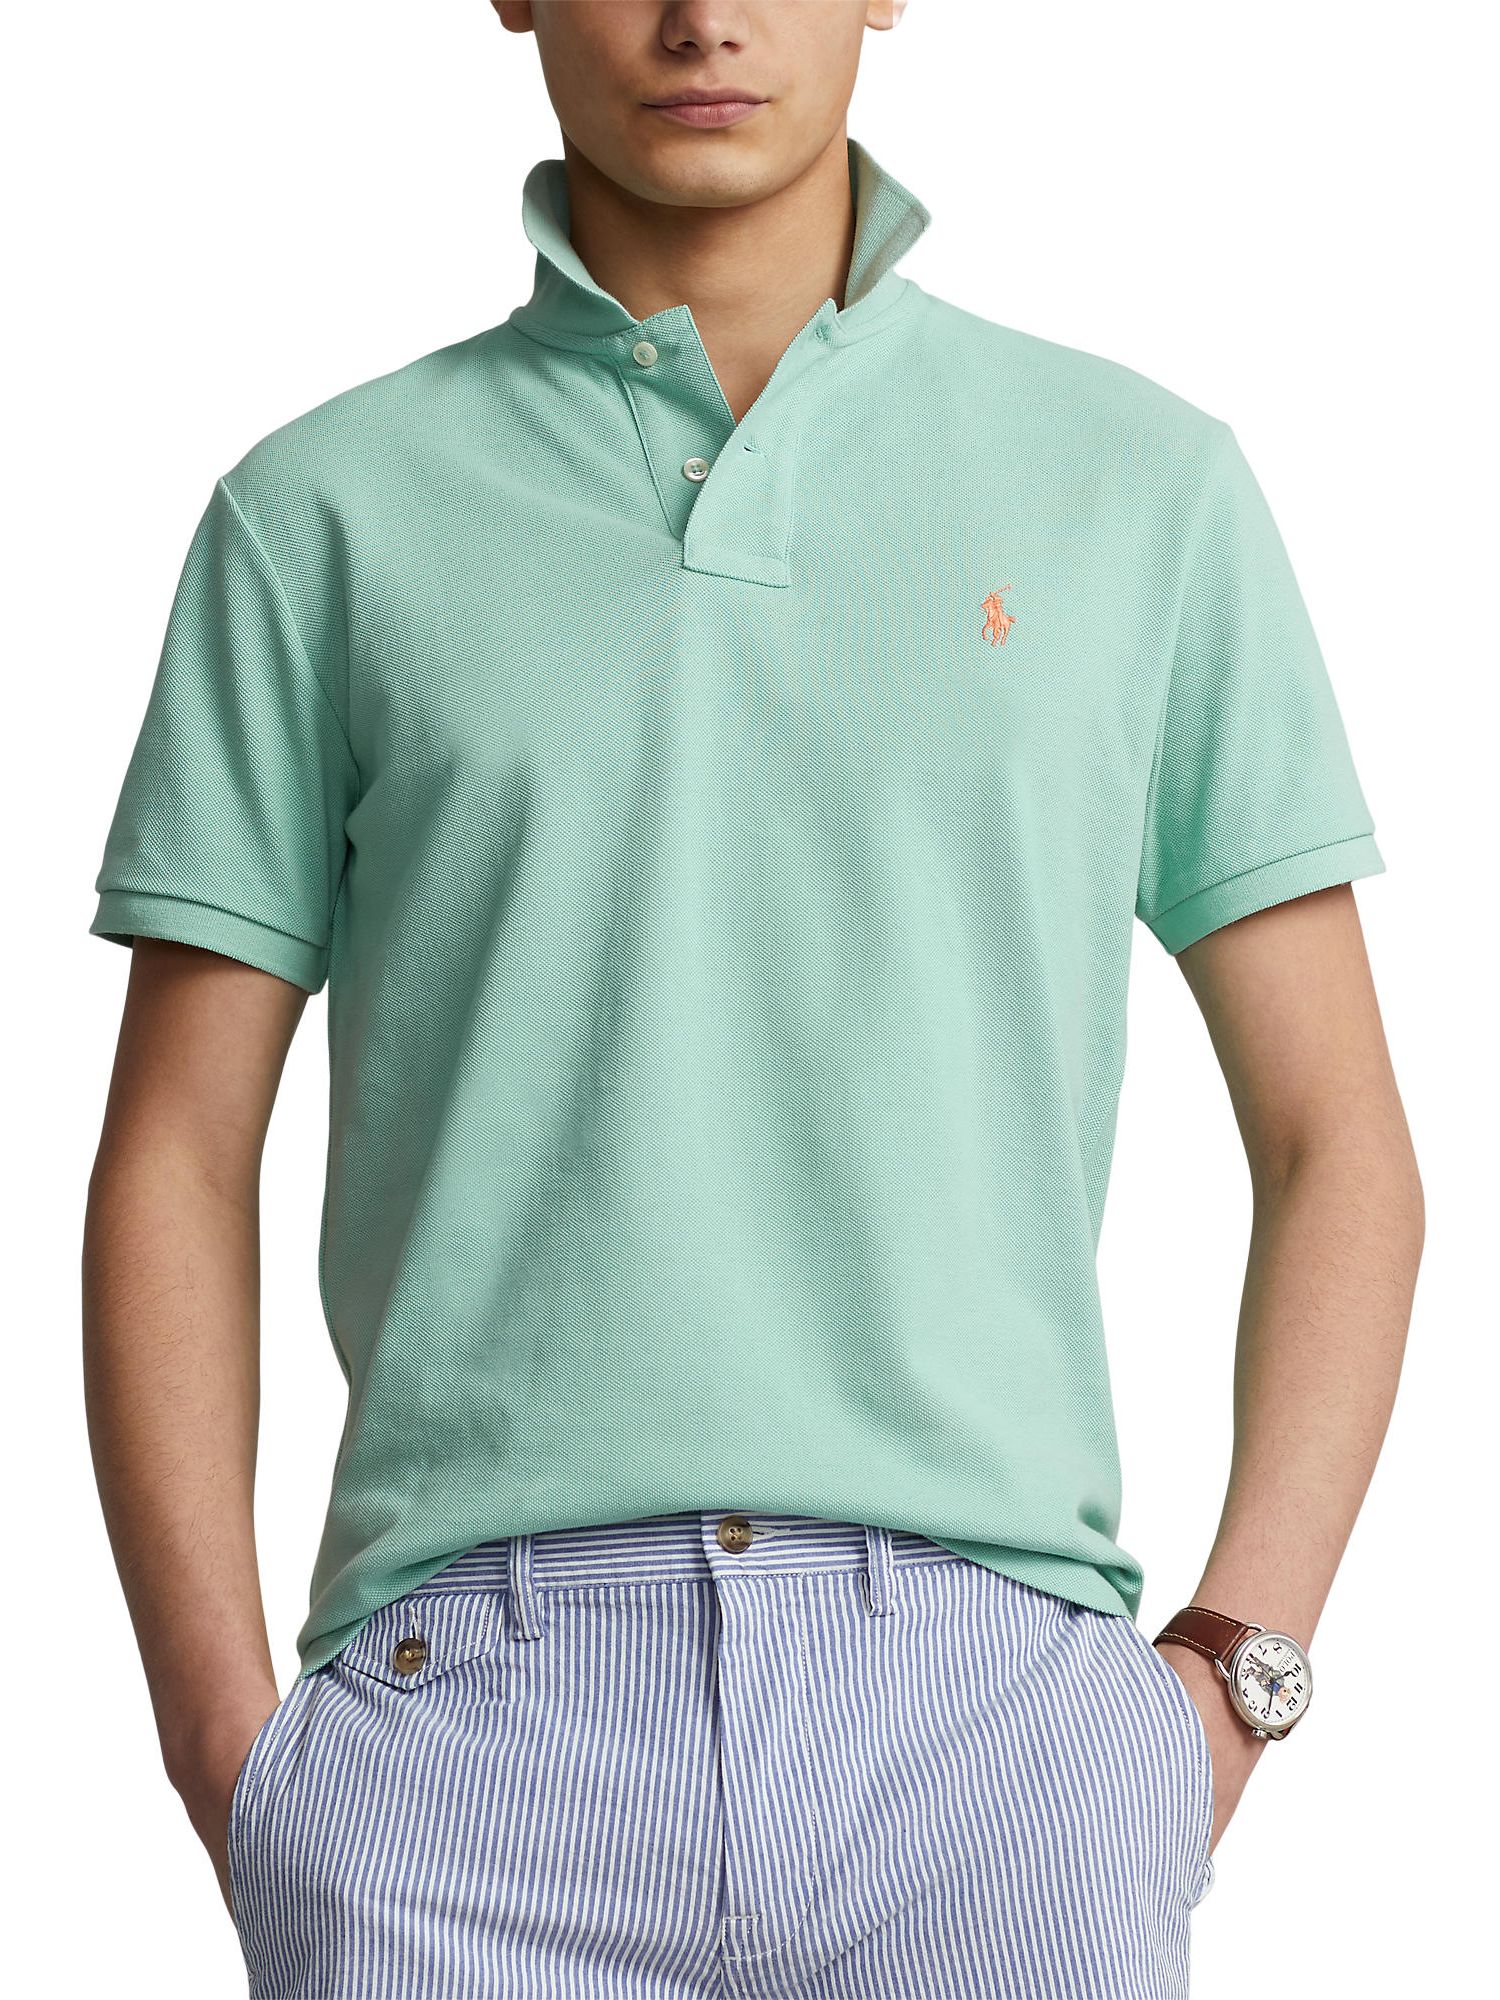 These Polo By Ralph Lauren Shirts Are Under $30 This Weekend At Macys |  